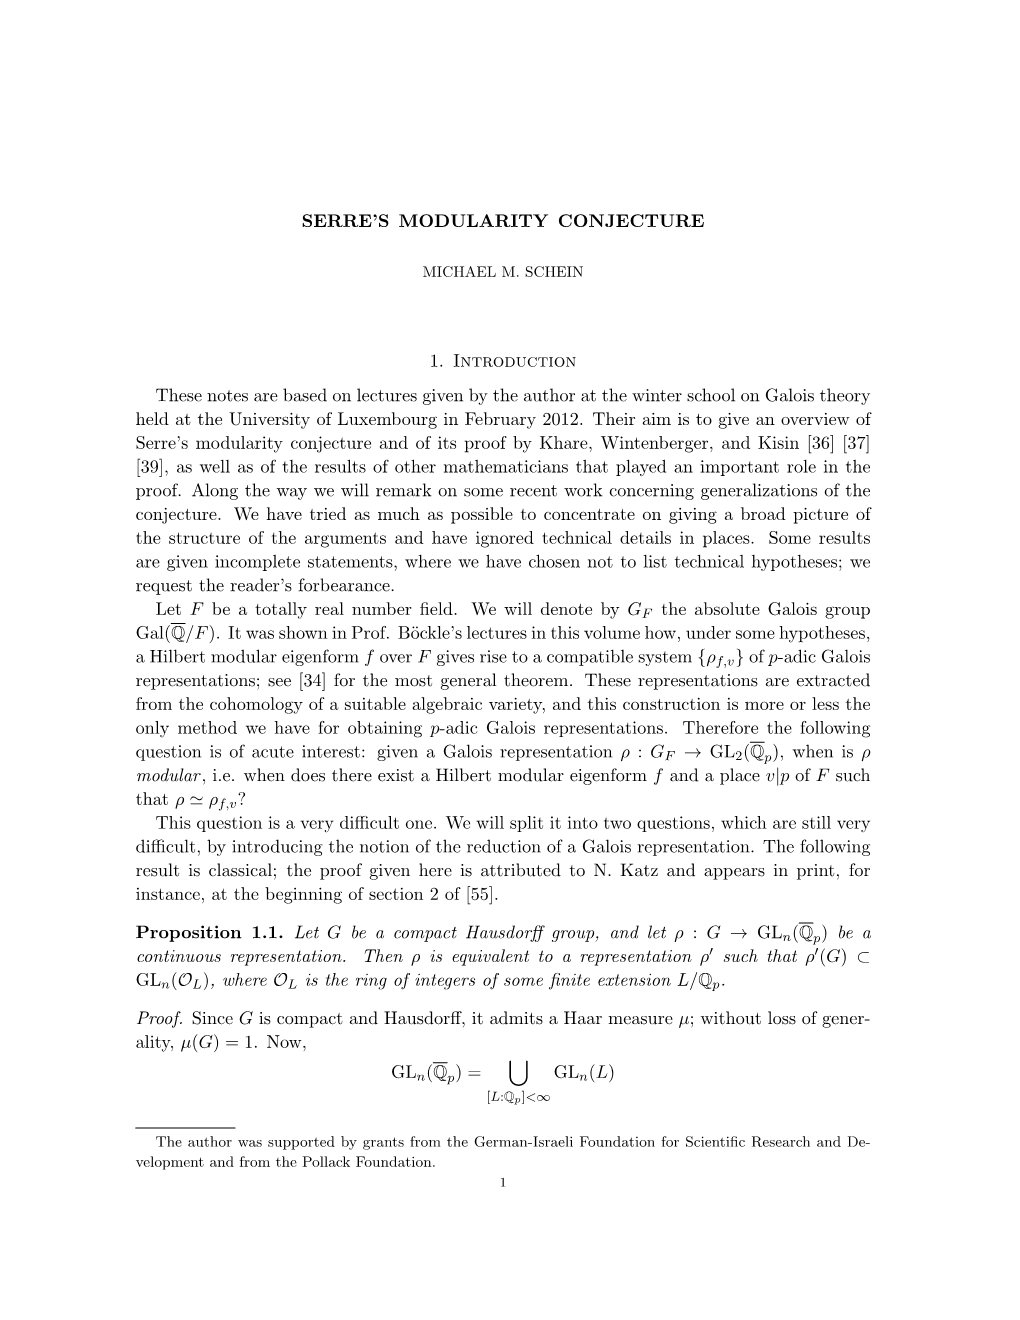 SERRE's MODULARITY CONJECTURE 1. Introduction